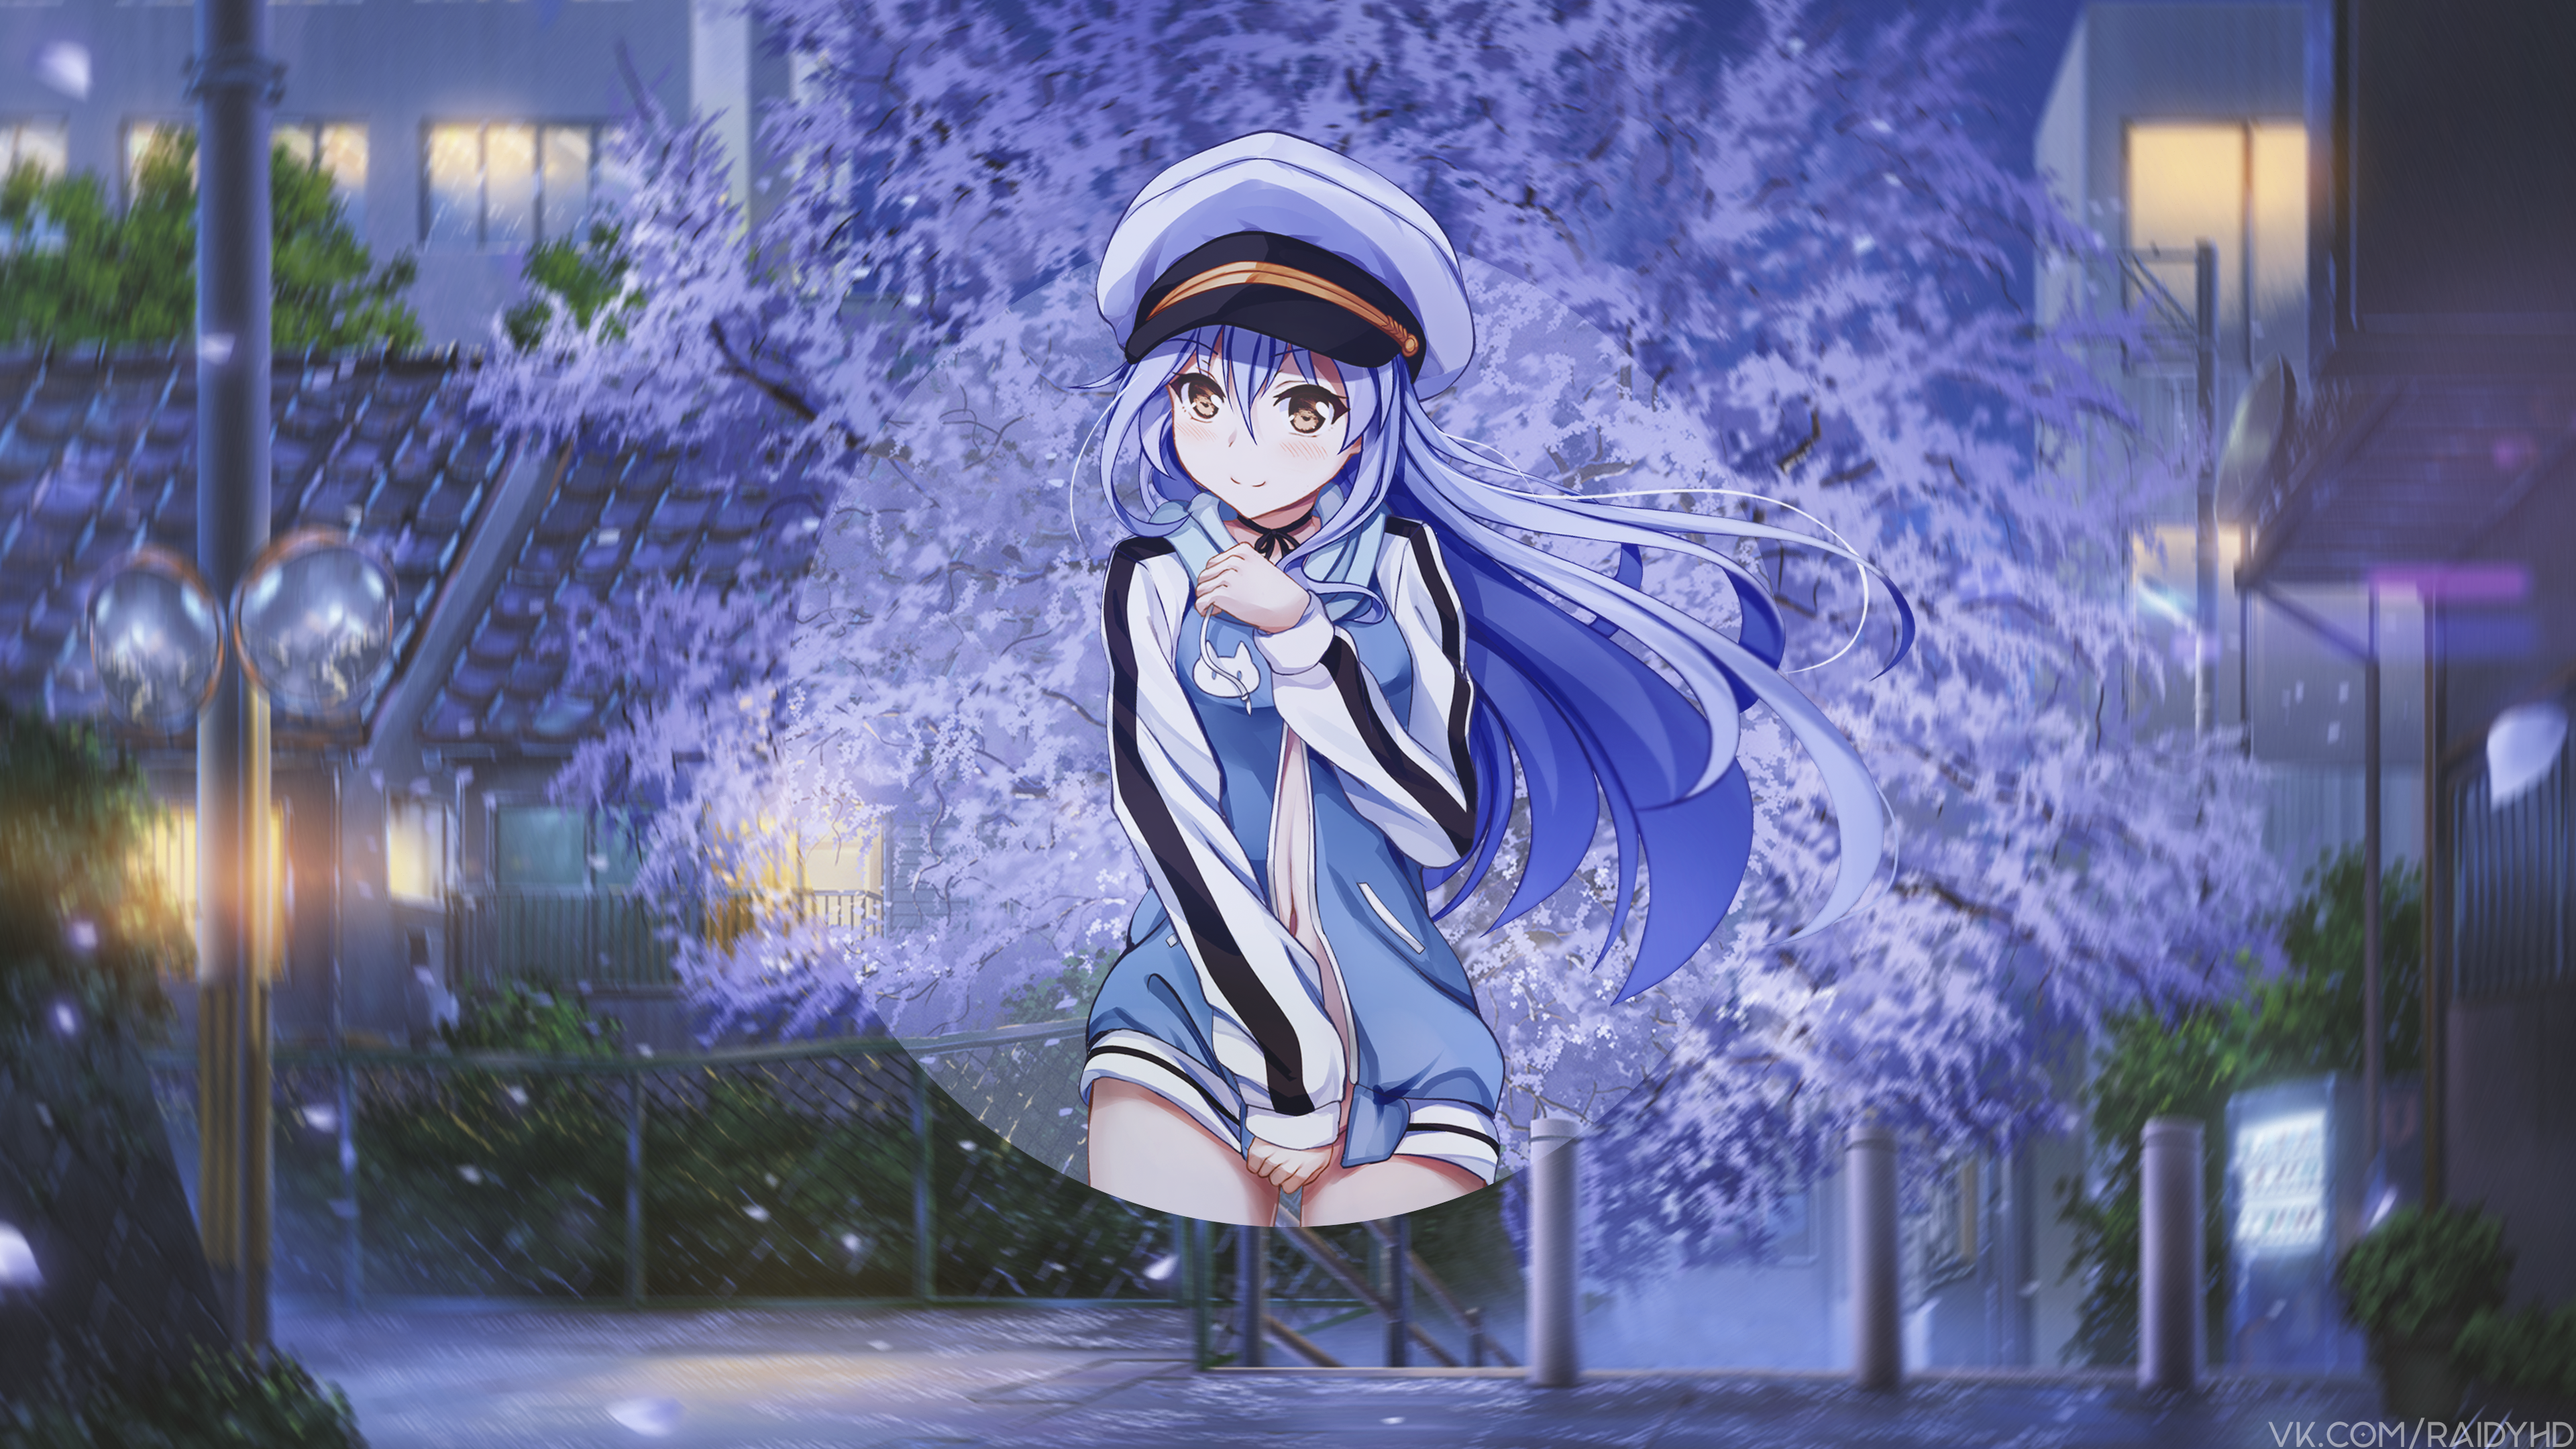 Anime 3840x2160 anime anime girls picture-in-picture Island (Anime) Rinne Ohara